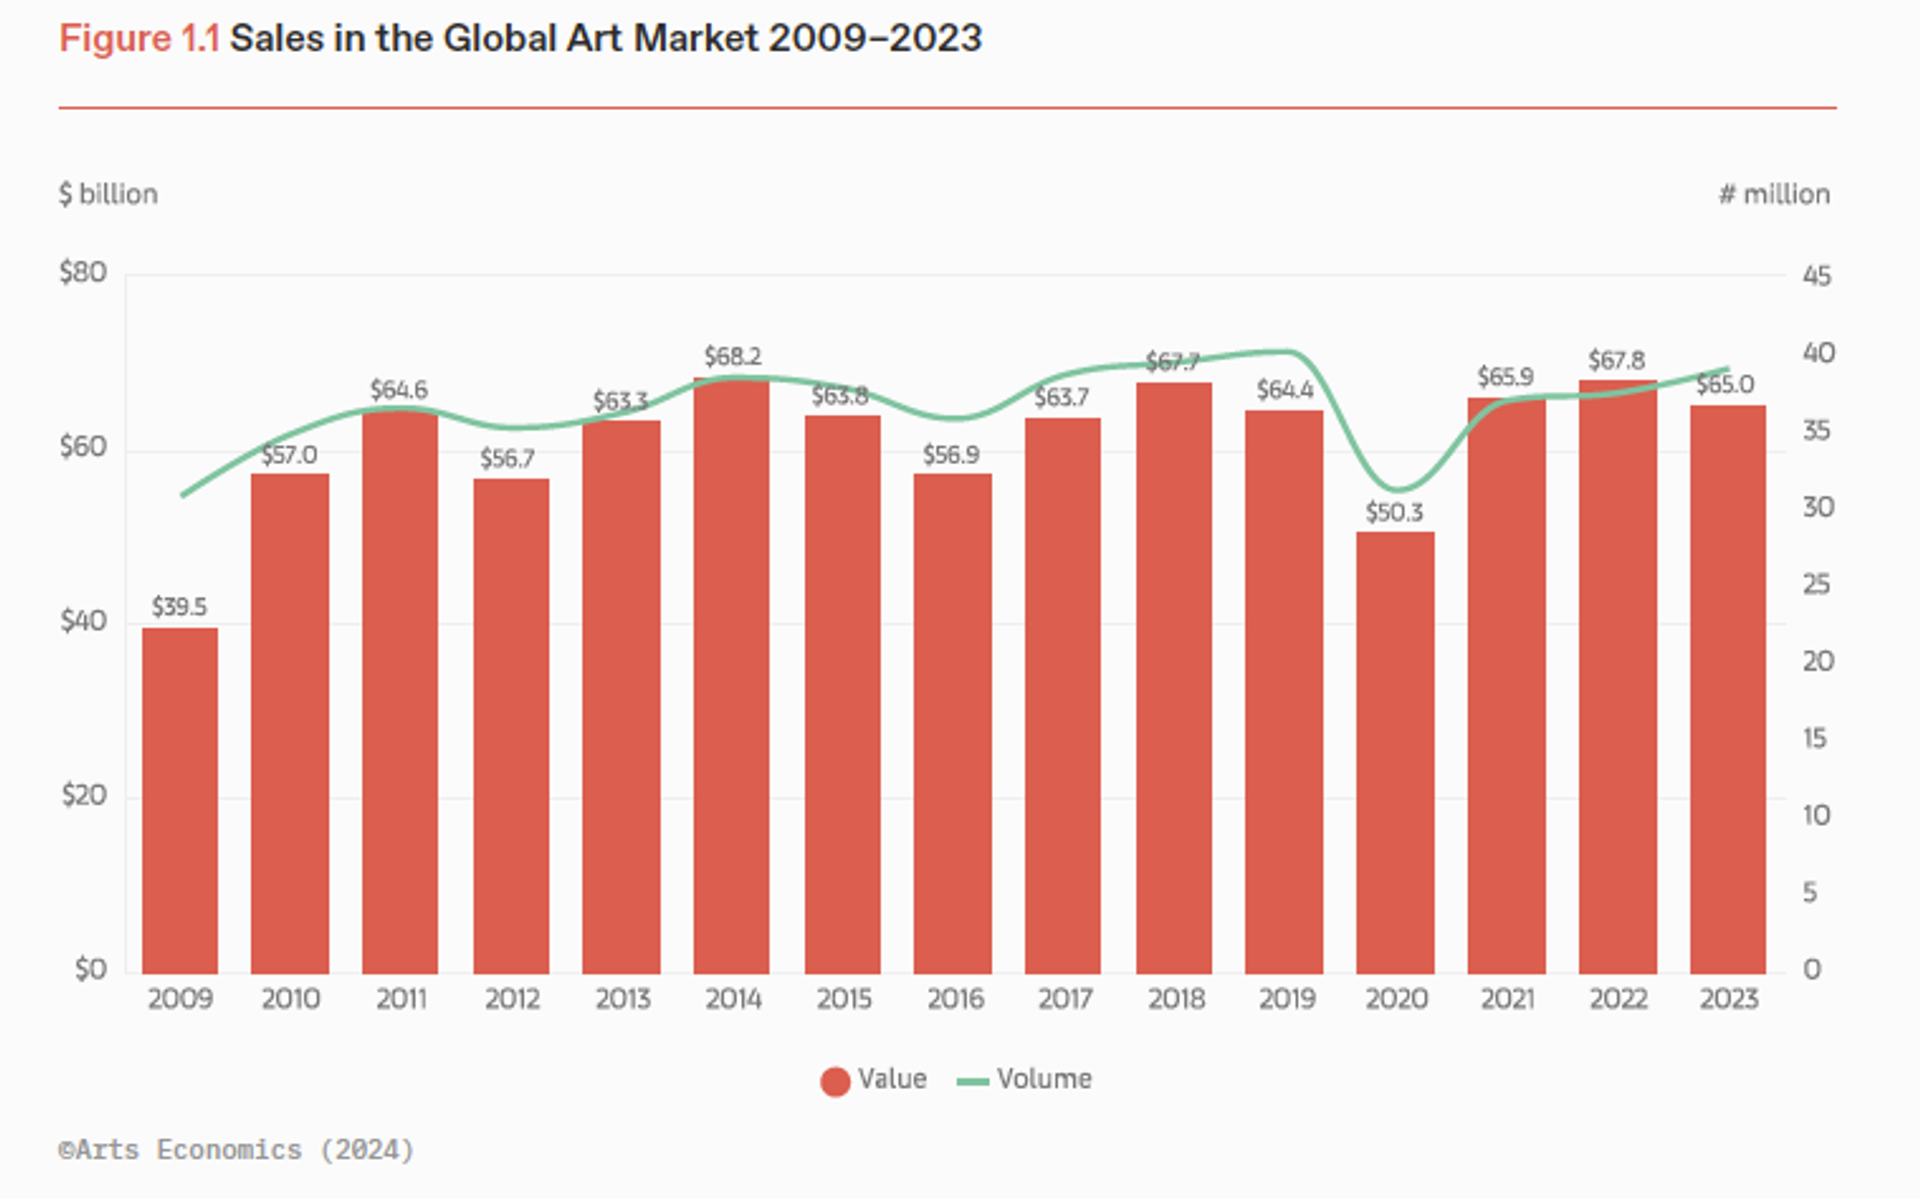 Bar graph of the sales in the global art market from 2009 to 2023.